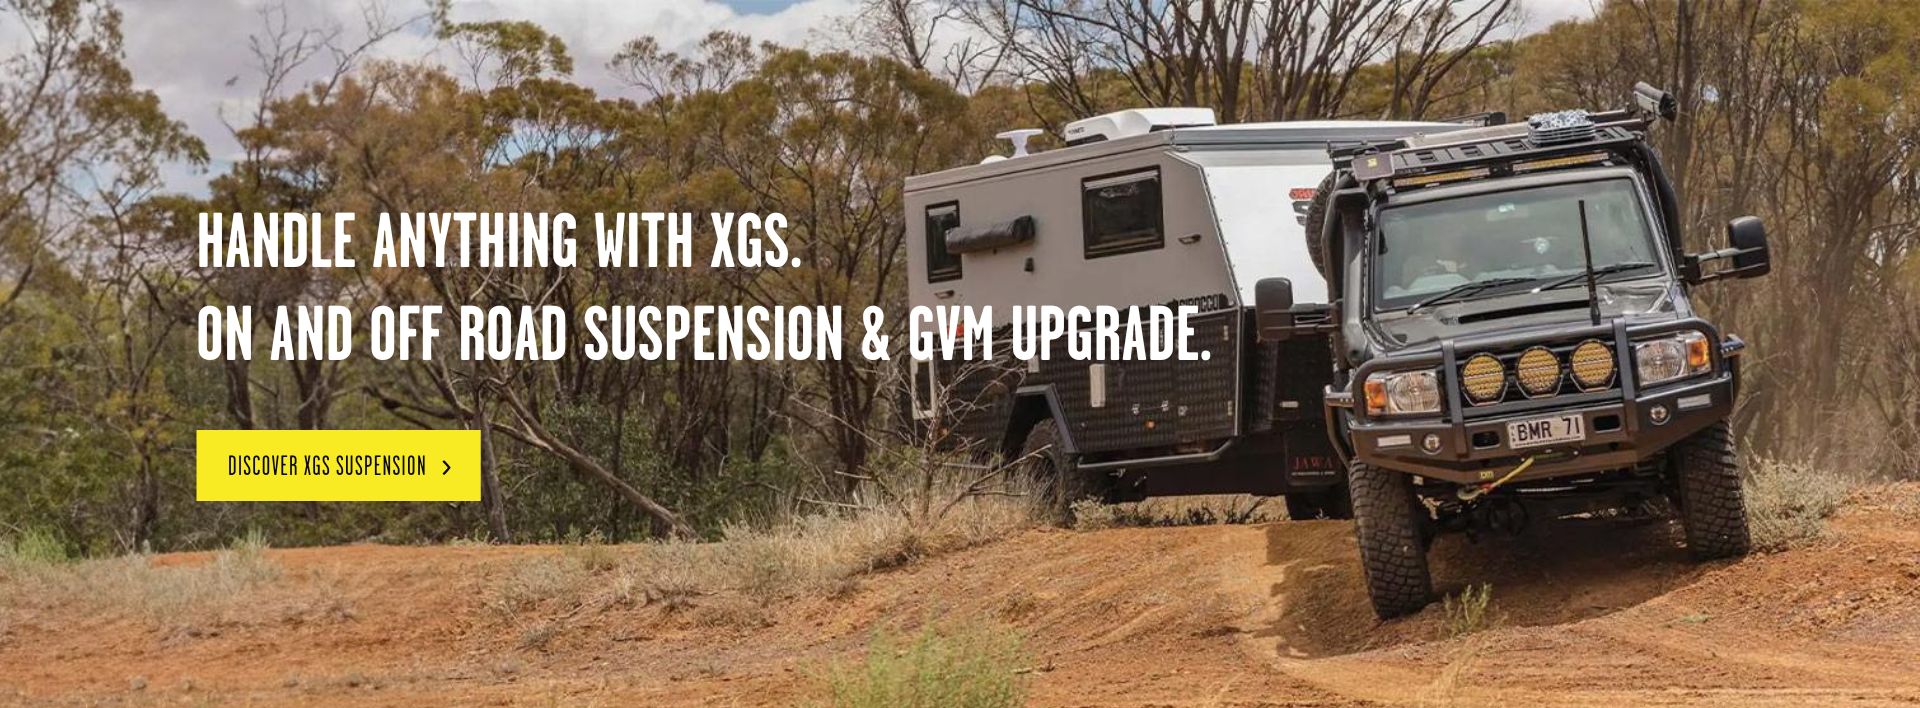 Handle Anything with XGS